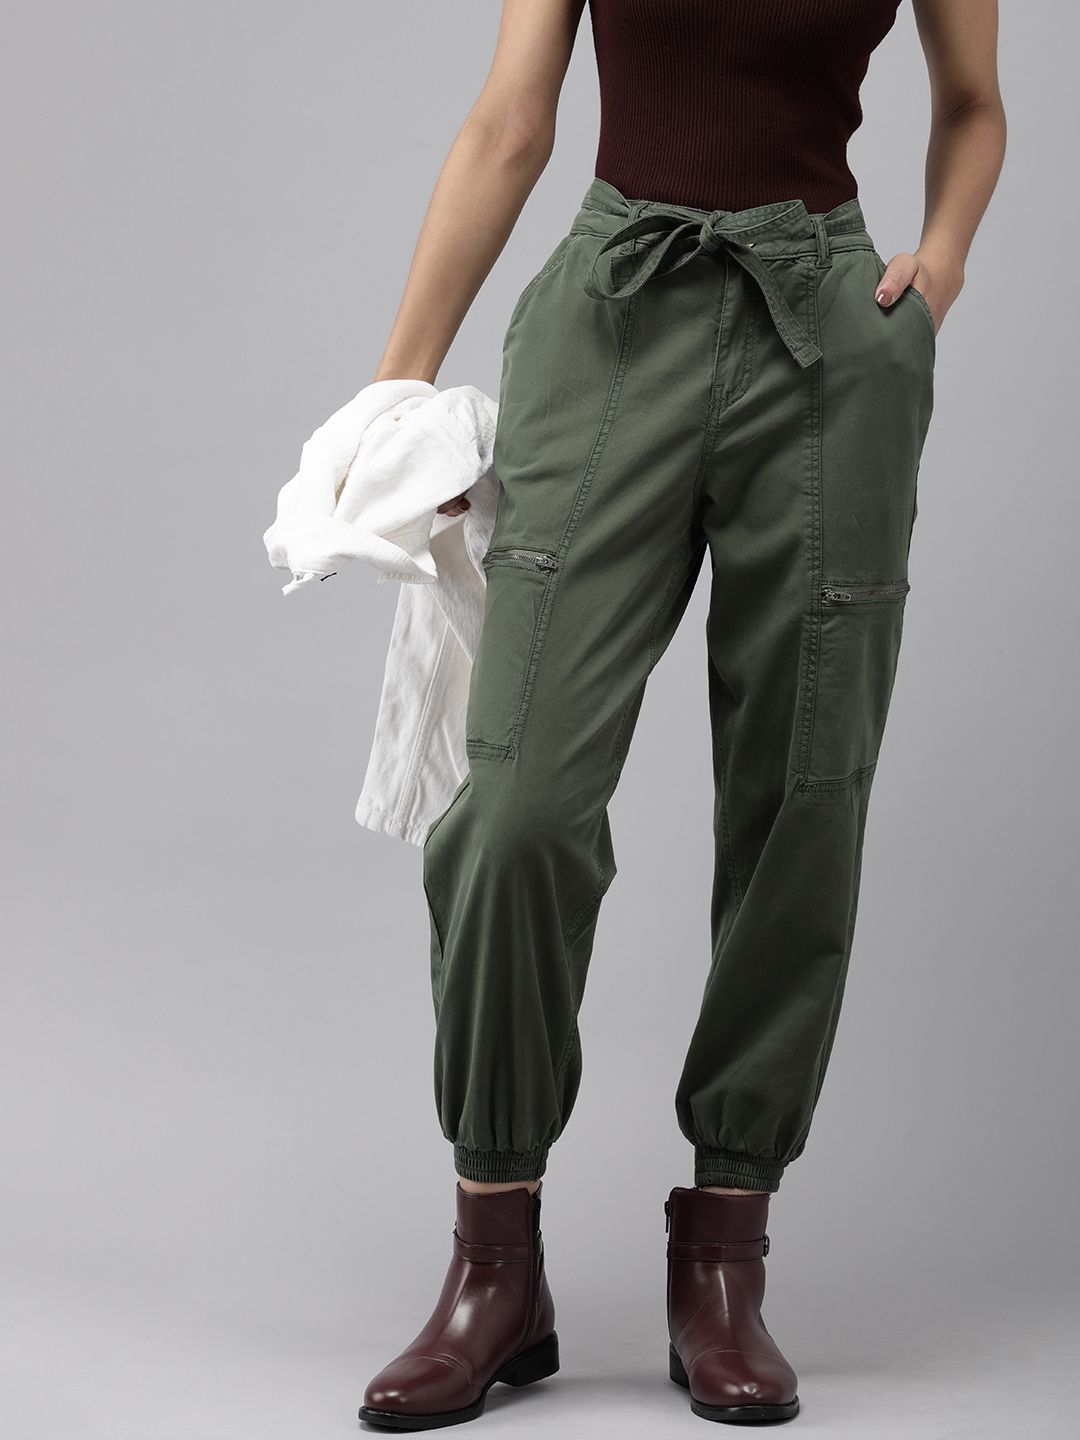 The Roadster Life Co. Women Mid-Rise Belted Cargo Style Joggers Price in India